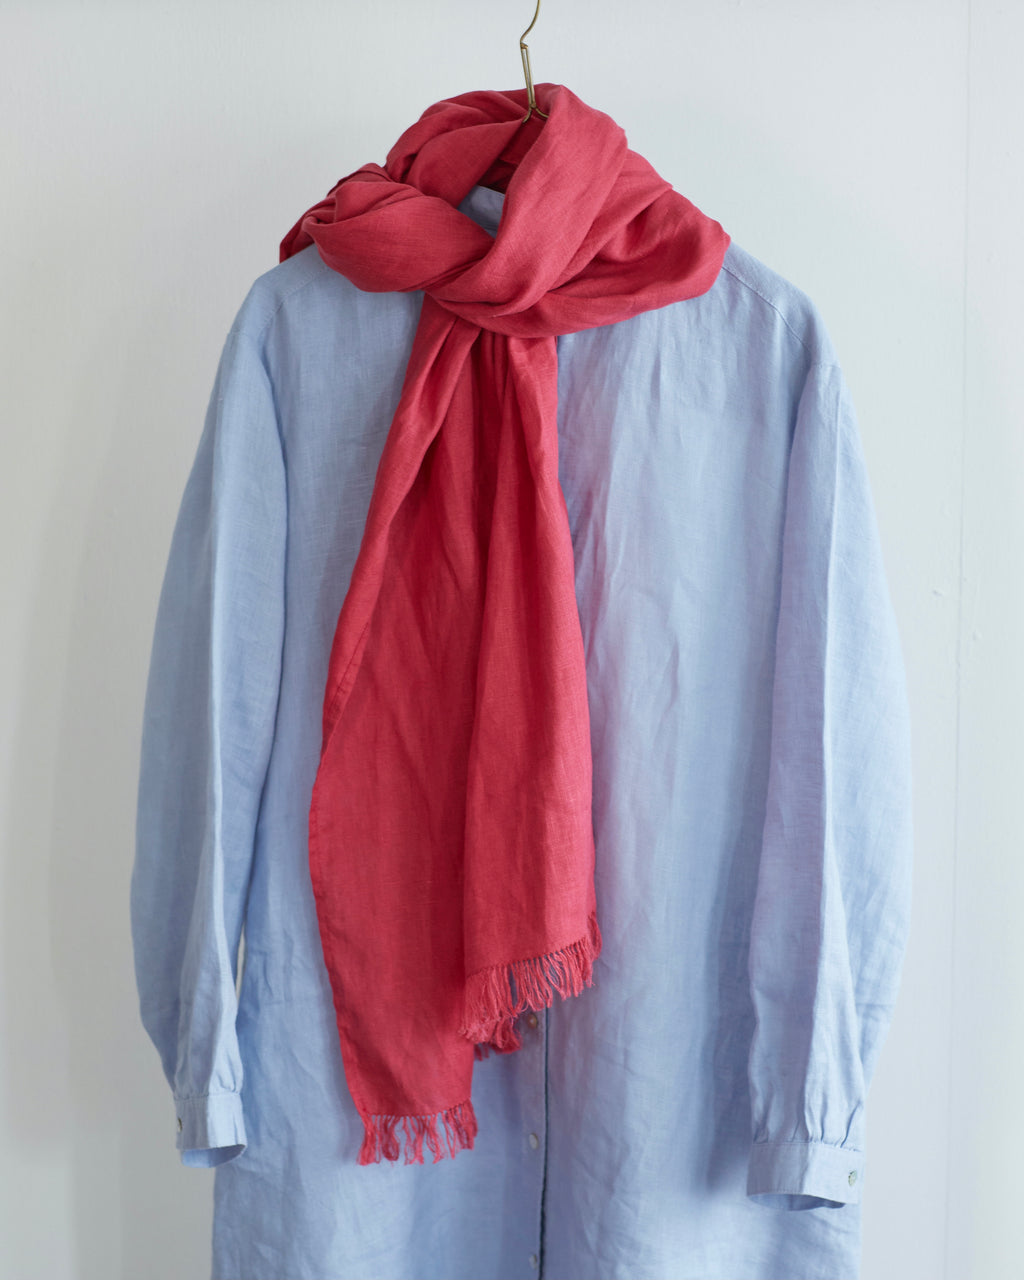 roserie scarf: red rose